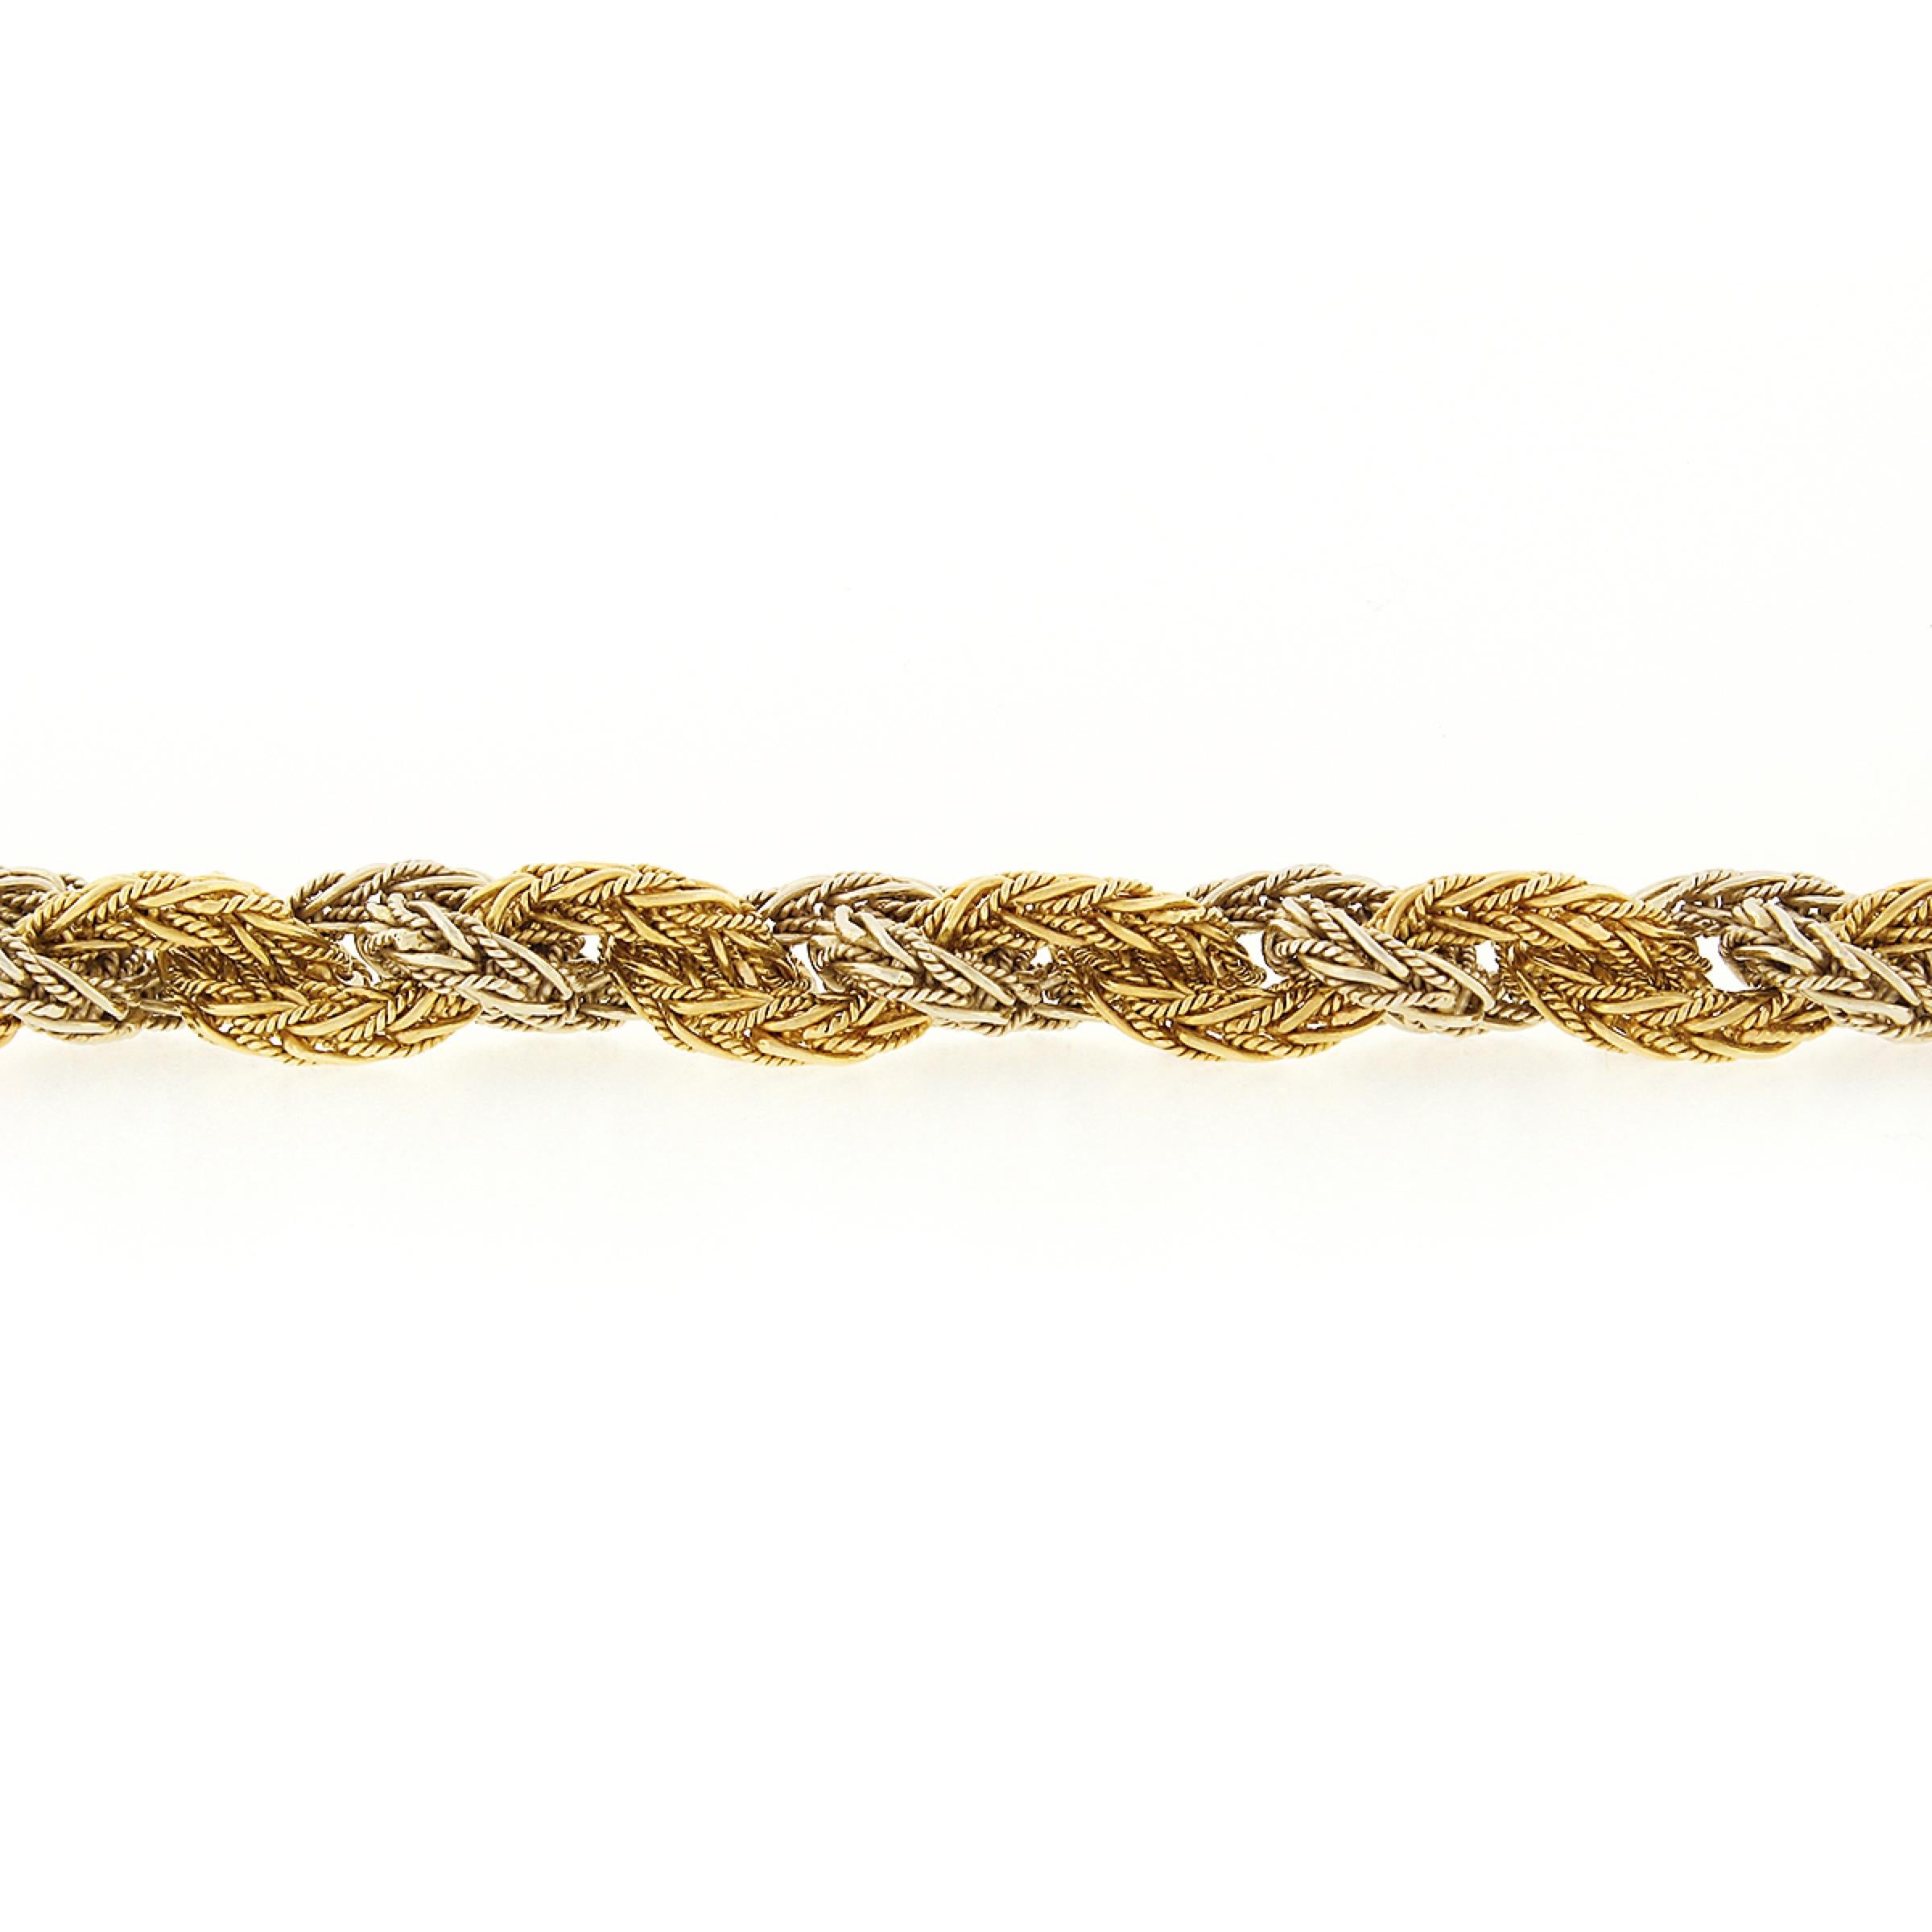 Vintage 18K TT Gold Braided Polished Twisted Wire Wheat Link Into Knot Bracelet In Excellent Condition For Sale In Montclair, NJ